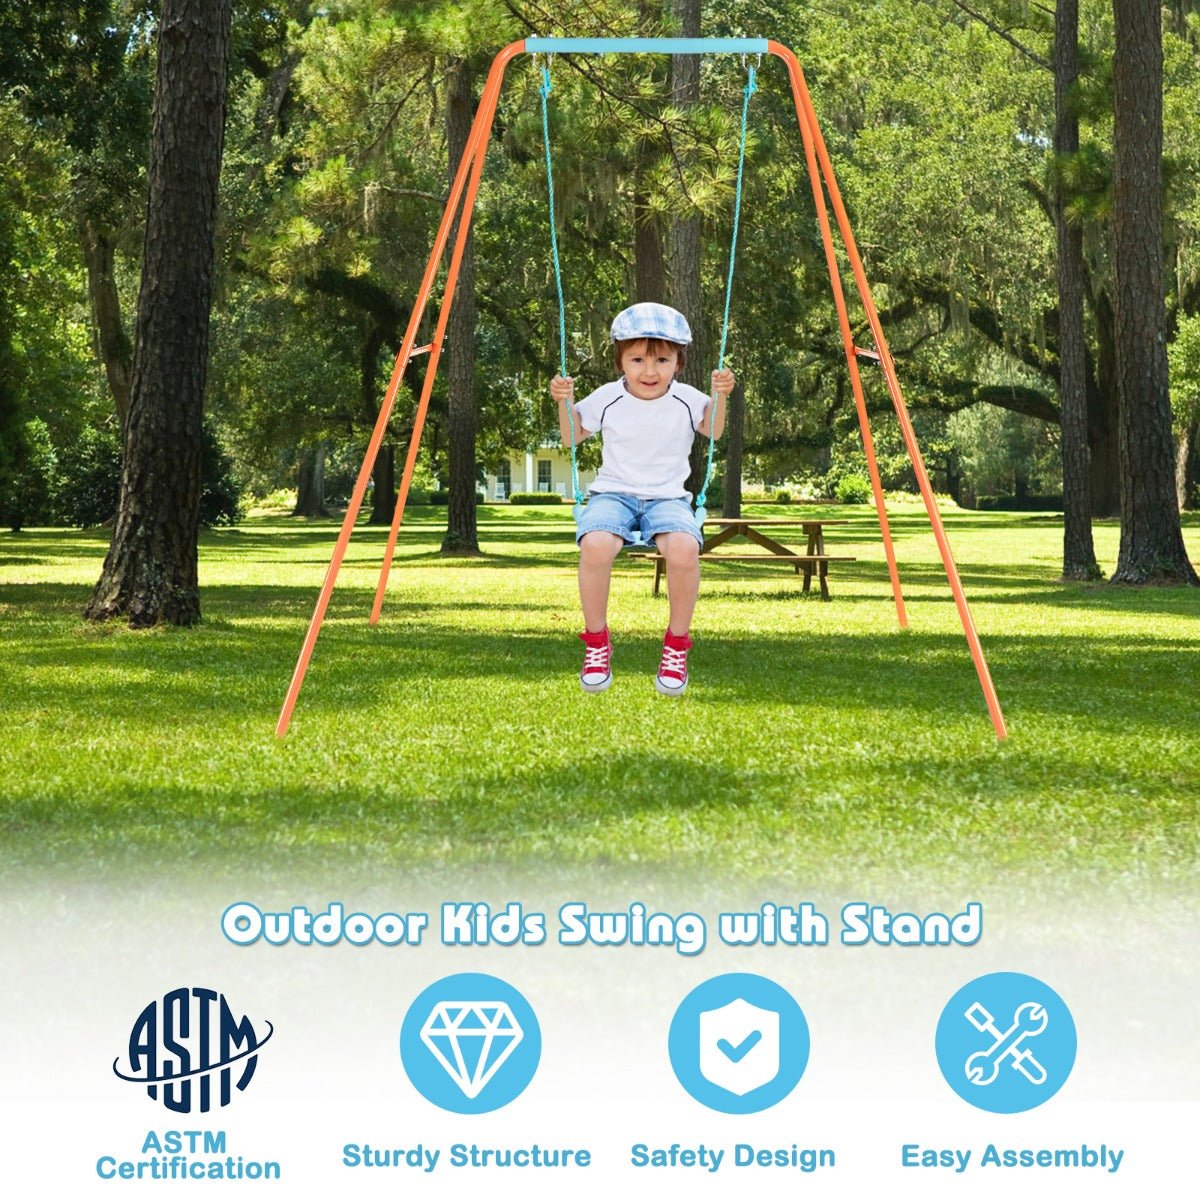 Metal Swing Set with A-Frame Design: Sturdy and Playful in Orange